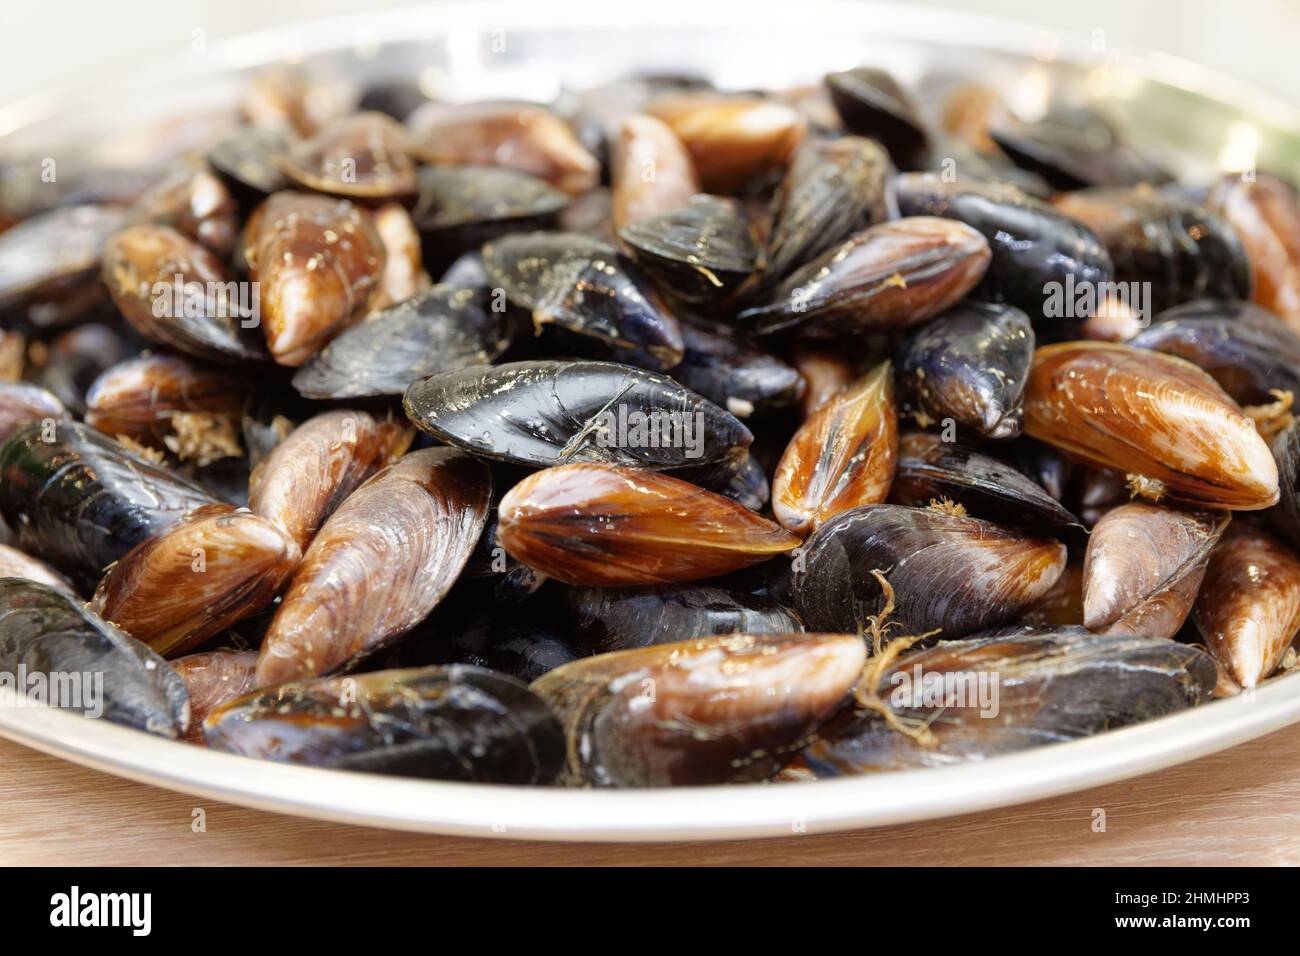 Raw uncooked mussels close-up Stock Photo